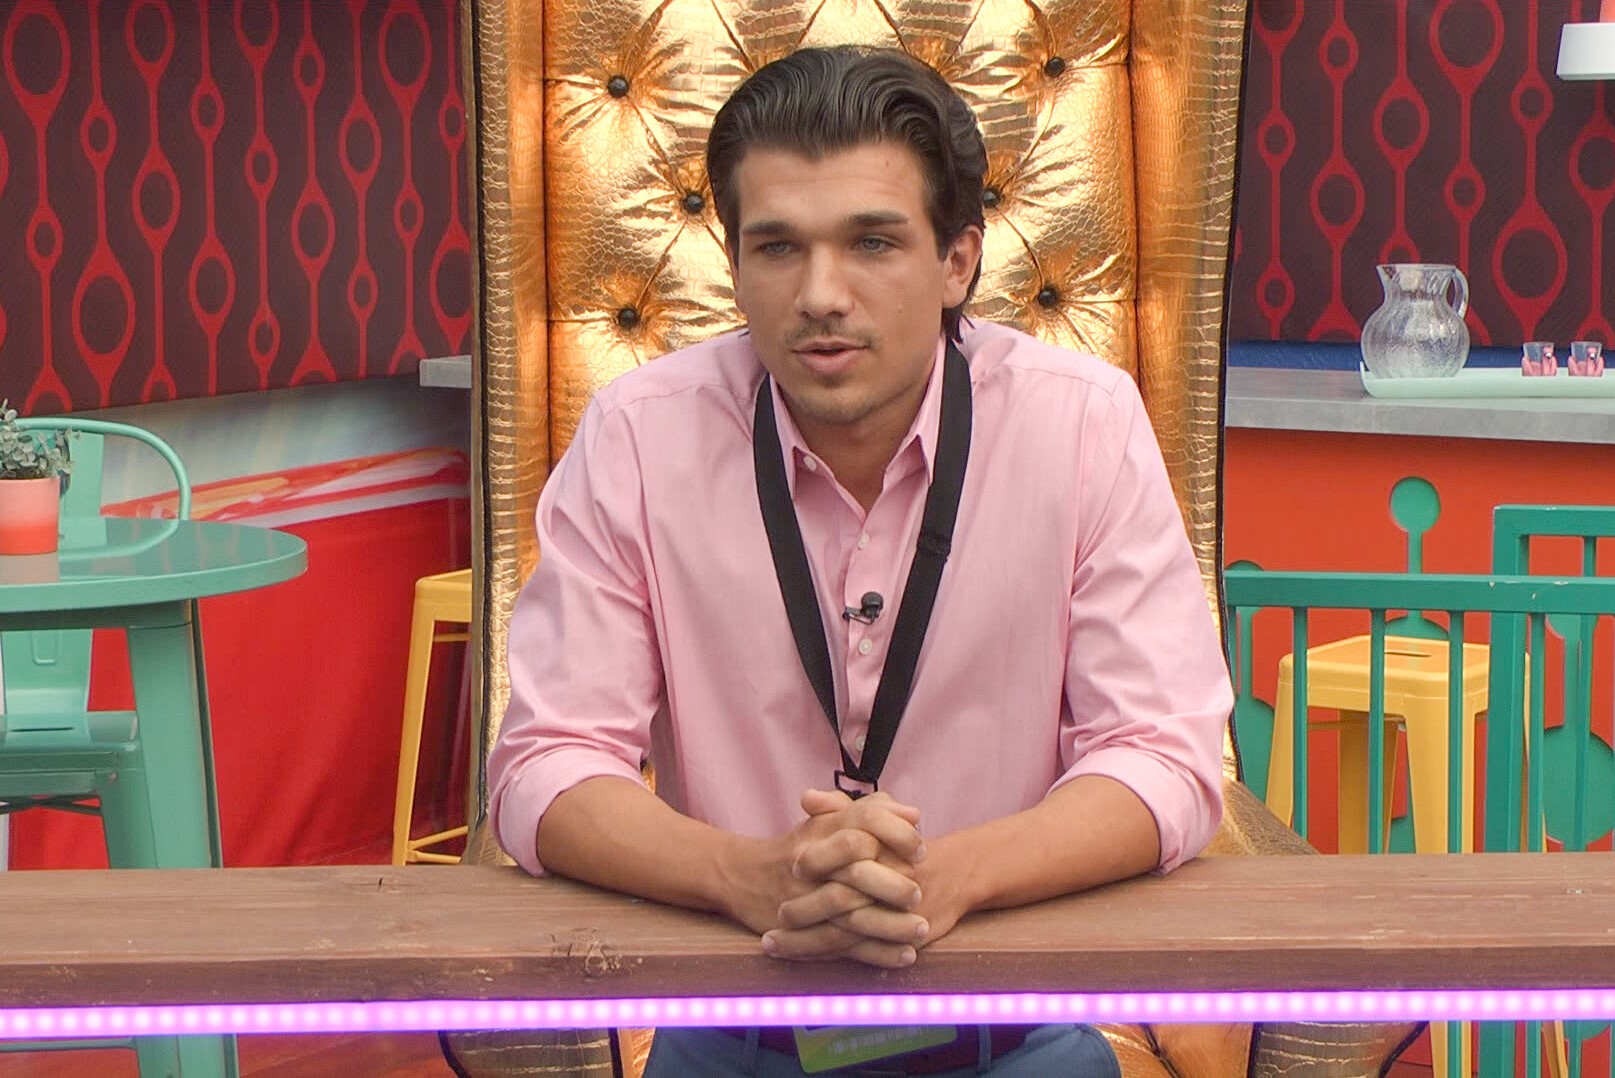 Joe 'Pooch' Pucciarelli, who is the Backstage Boss on 'Big Brother' Season 24, wears a pink button-up shirt and a backstage pass around his neck.